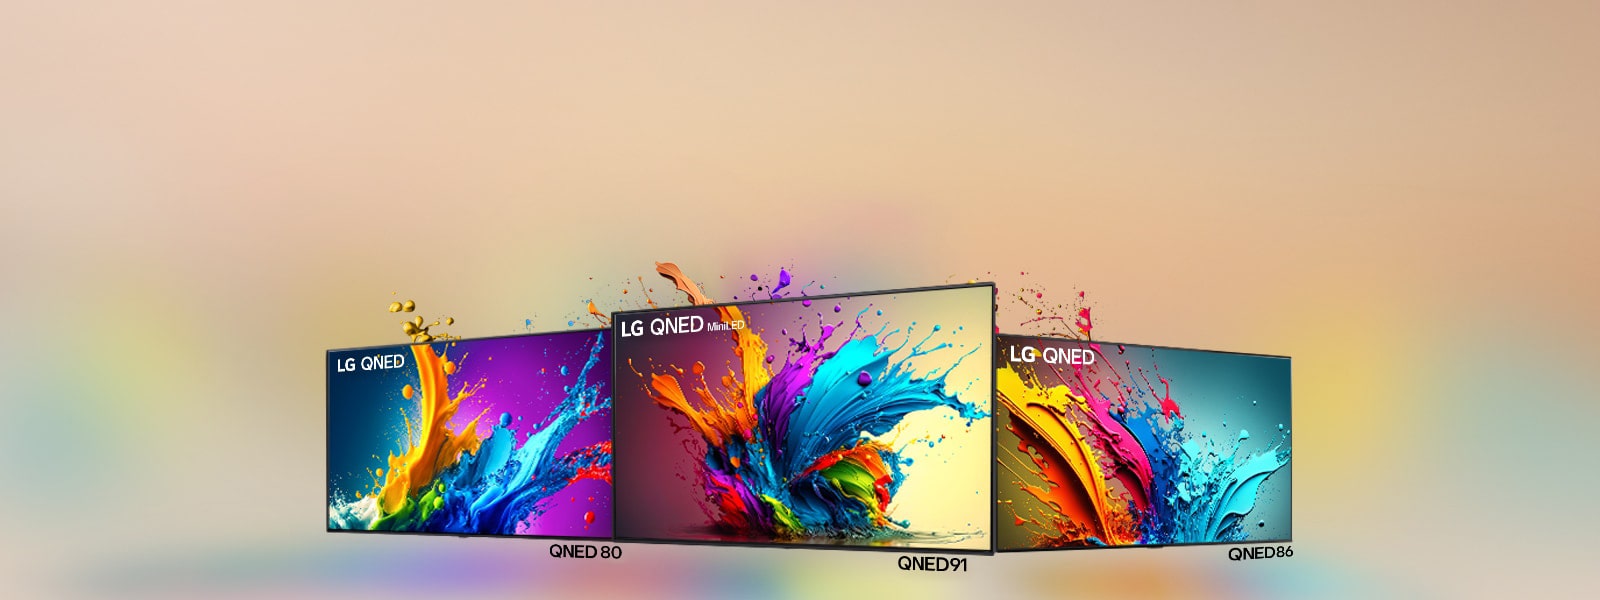 All-New LG QNED Meet the all-new QNED lineup  "LG QNED MiniLED QNED99 LG QNED MiniLED QNED90 LG QNED QNED89 LG QNED QNED80 LG QNED QNED85"  LEARN MORE 2024 LG QNED Lineup Microsite LG QNED 80, QNED 90, QNED 99, QNED 89, and QNED 85 TV standing side by side in an angled line with QNED 99 TV facing forward and the others at a 45 degree angle. Colorful droplets and waves of paint explode out of each screen, and light radiates, casting colorful shadows below.